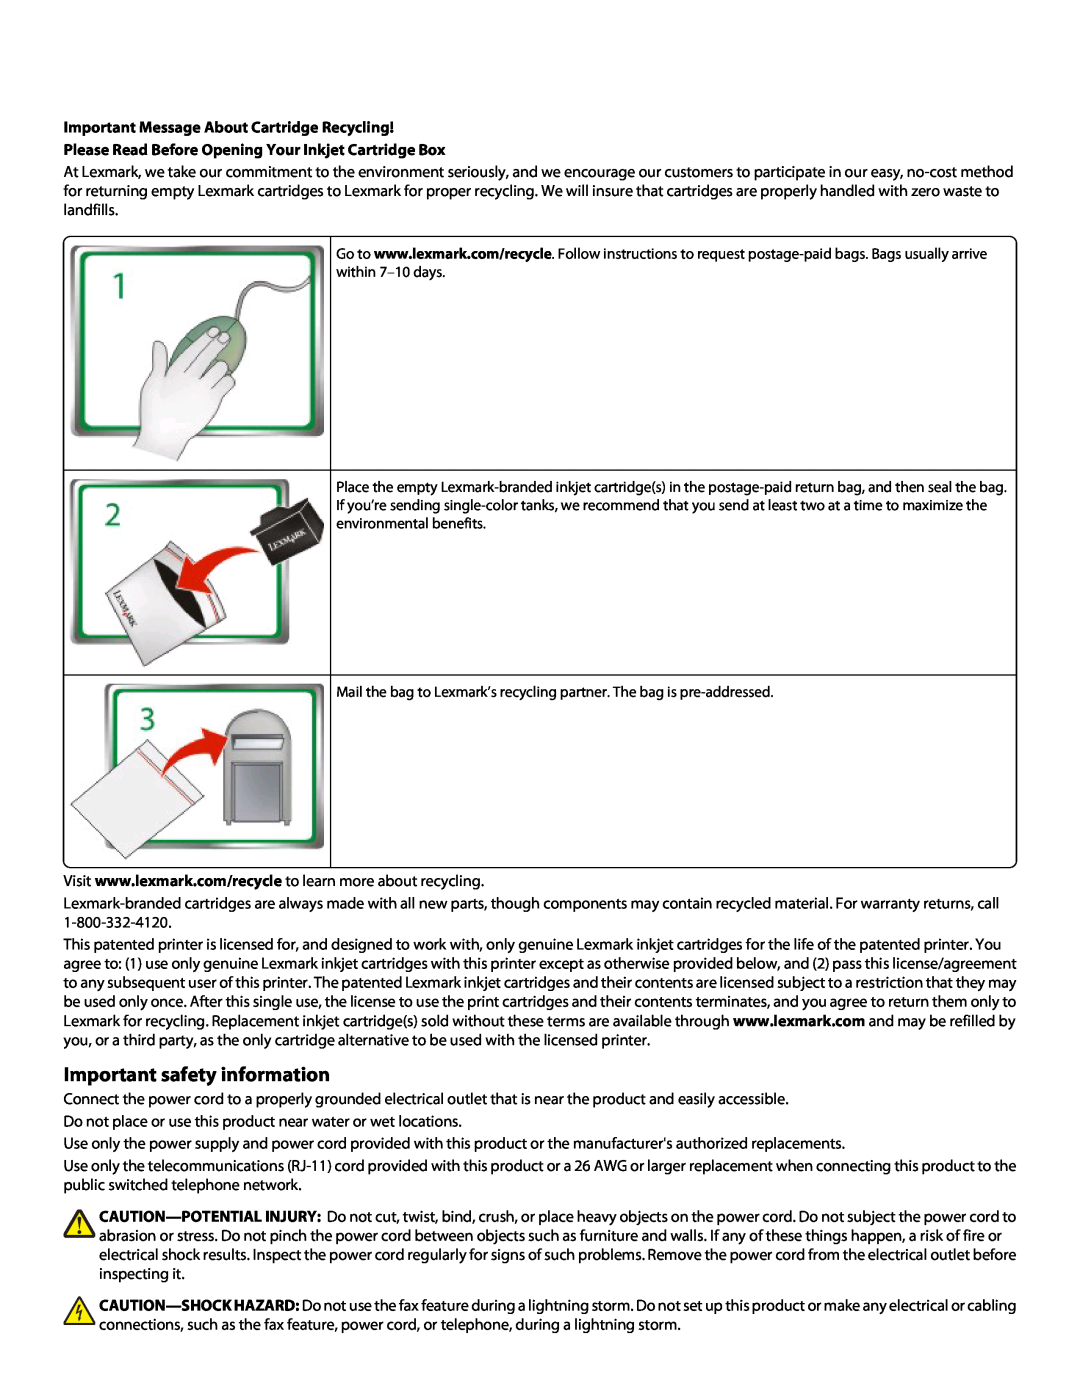 Lexmark Pro803, Pro800 manual Important safety information, Important Message About Cartridge Recycling 